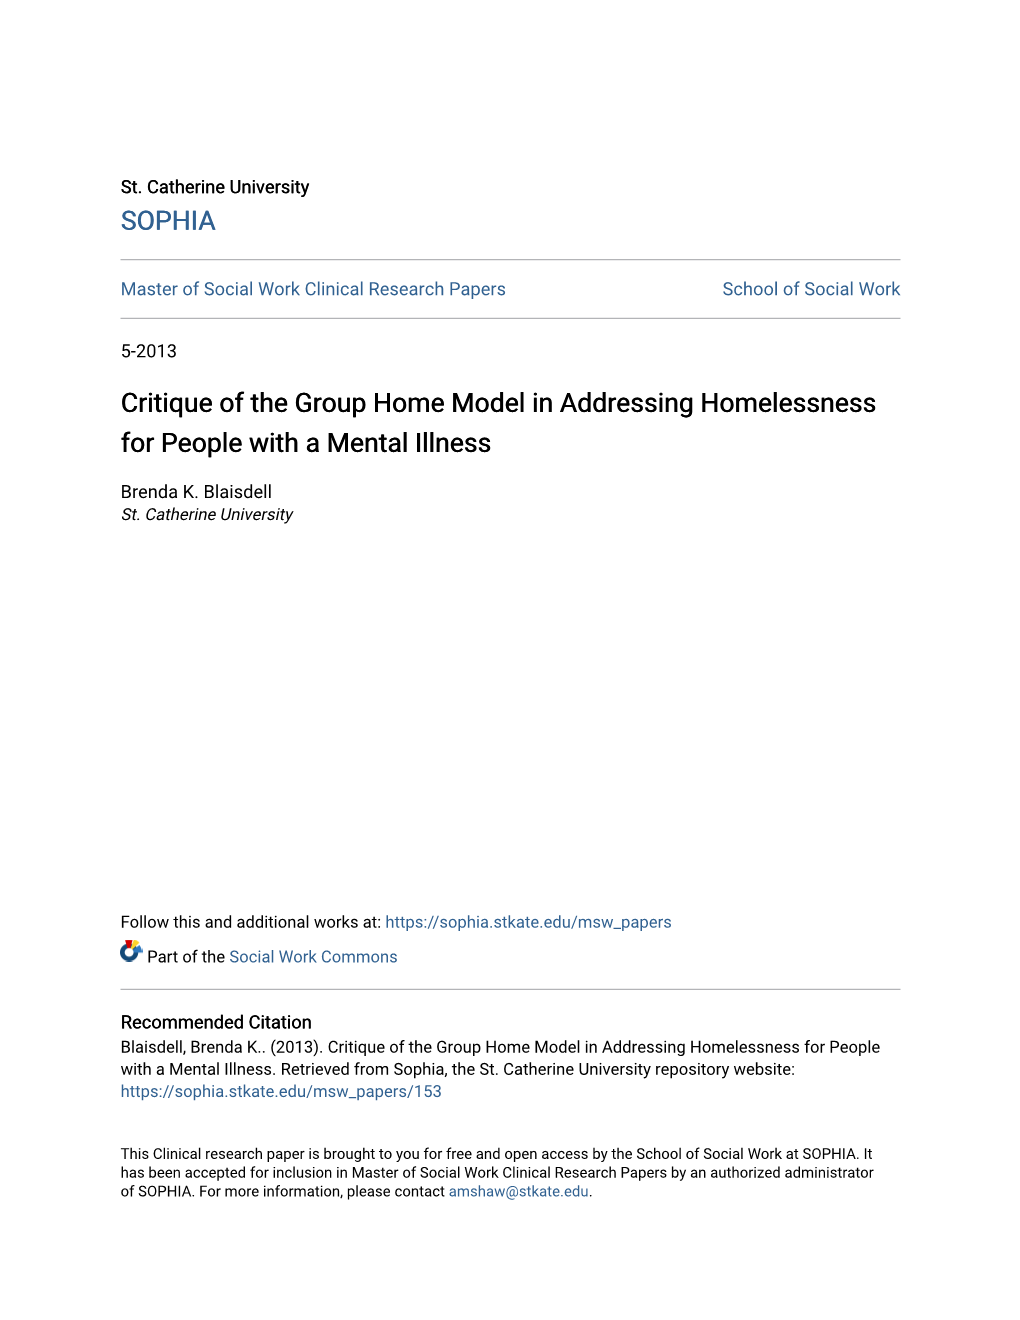 Critique of the Group Home Model in Addressing Homelessness for People with a Mental Illness